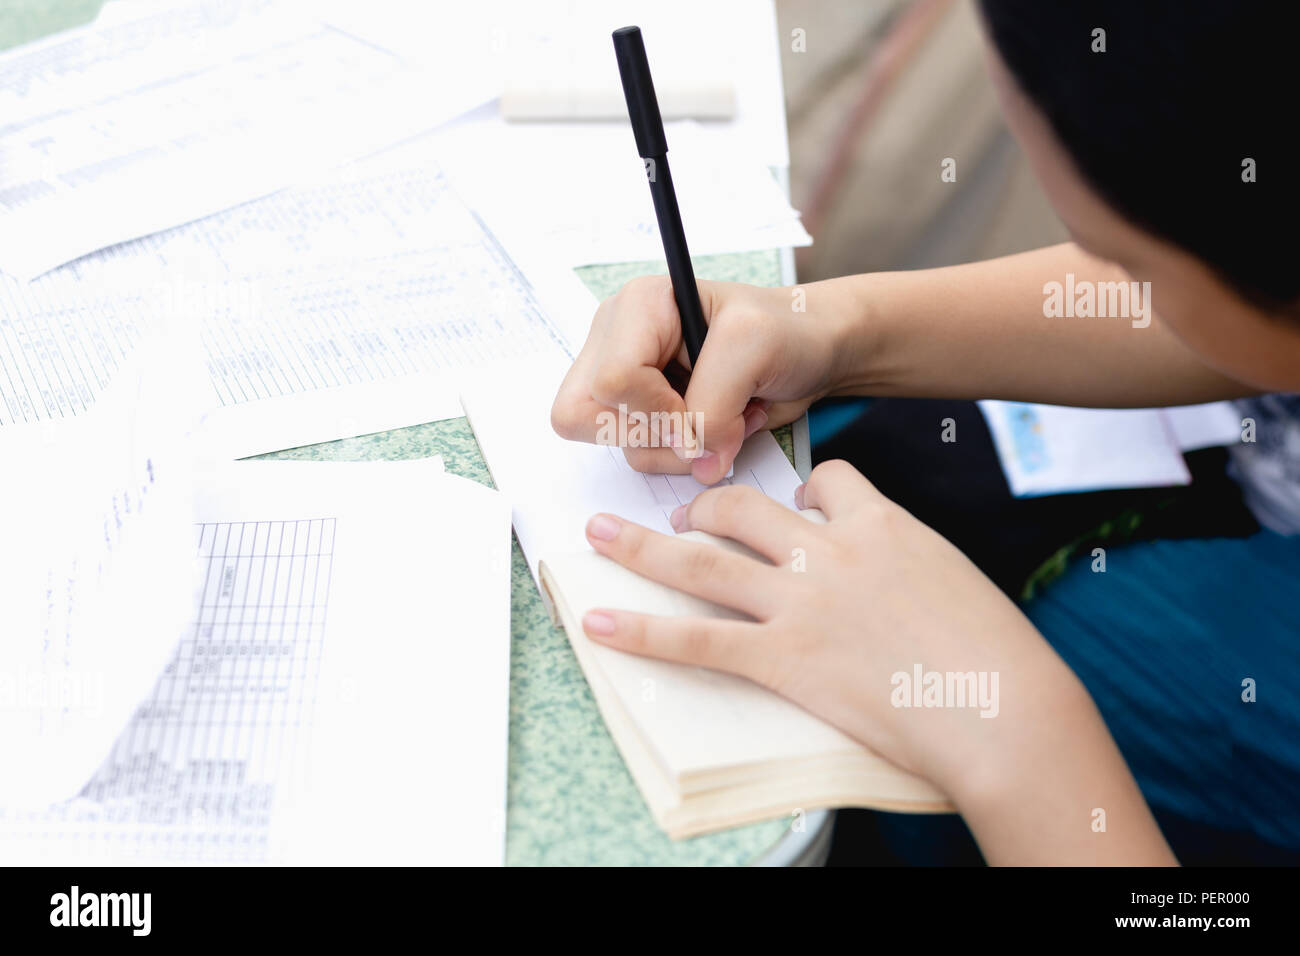 Schoolgirl with pen writing down doing homework on the table. Stock Photo